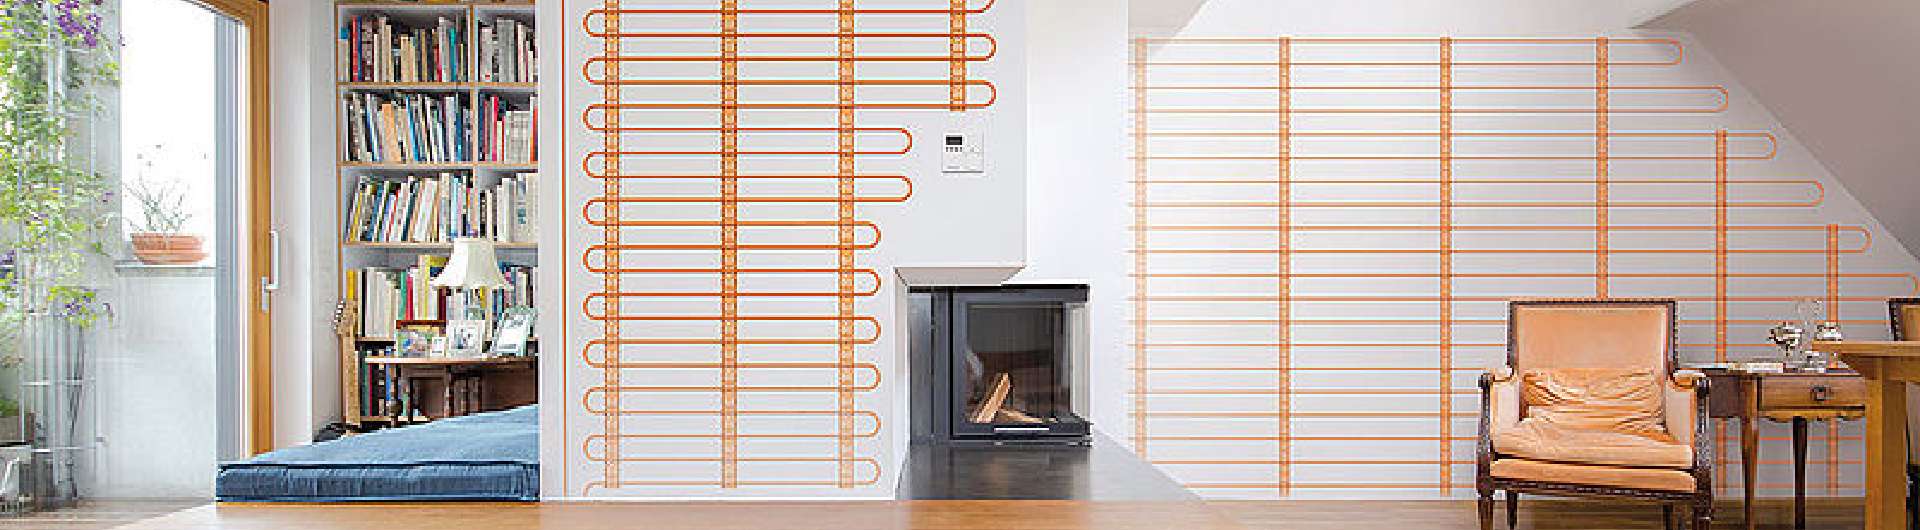 Wall Heating System